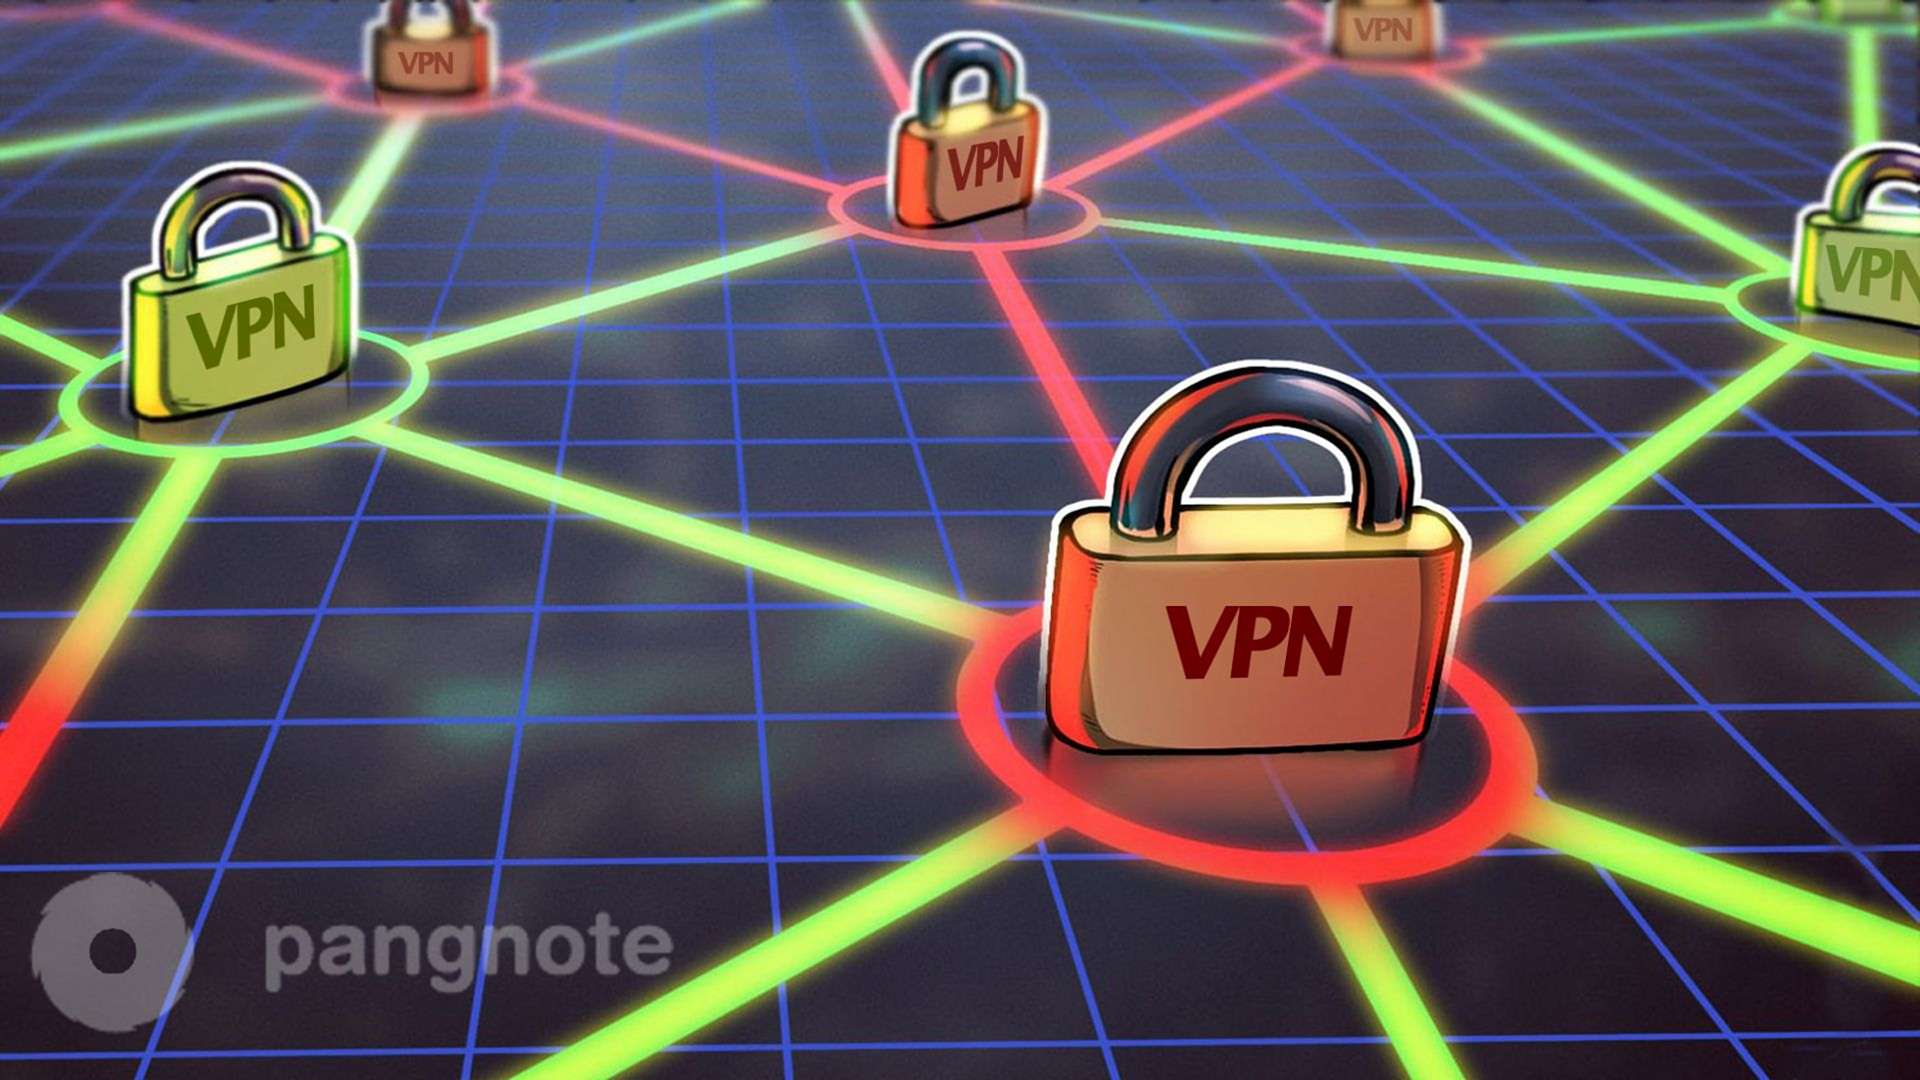 Using a Wi-Fi VPN does not allow you to reliably protect a public network